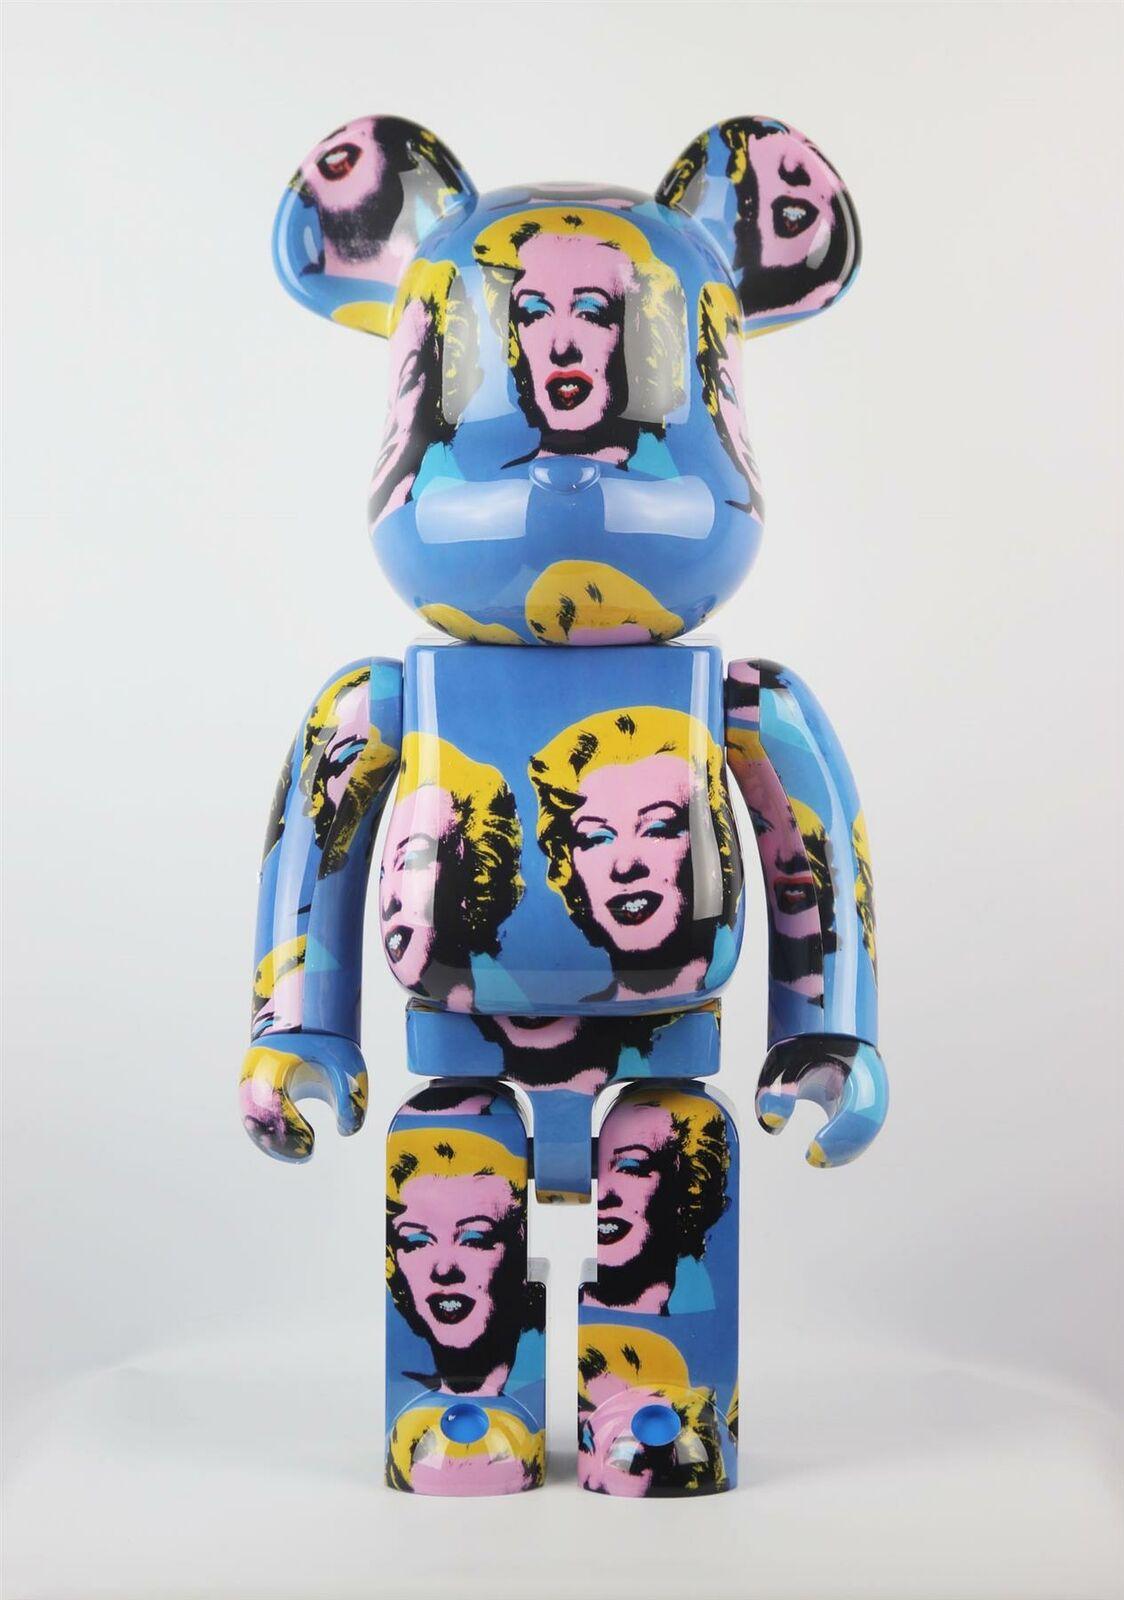 Be@rbrick + Andy Warhol Marilyn Monroe printed Bearbrick 1000% Vinyl Figure.
A unique, timeless collectible trademarked & licensed by the Estate of Andy Warhol, the partnered collectible reveals Warhol's iconic Marilyn Monroe imagery wrapping the